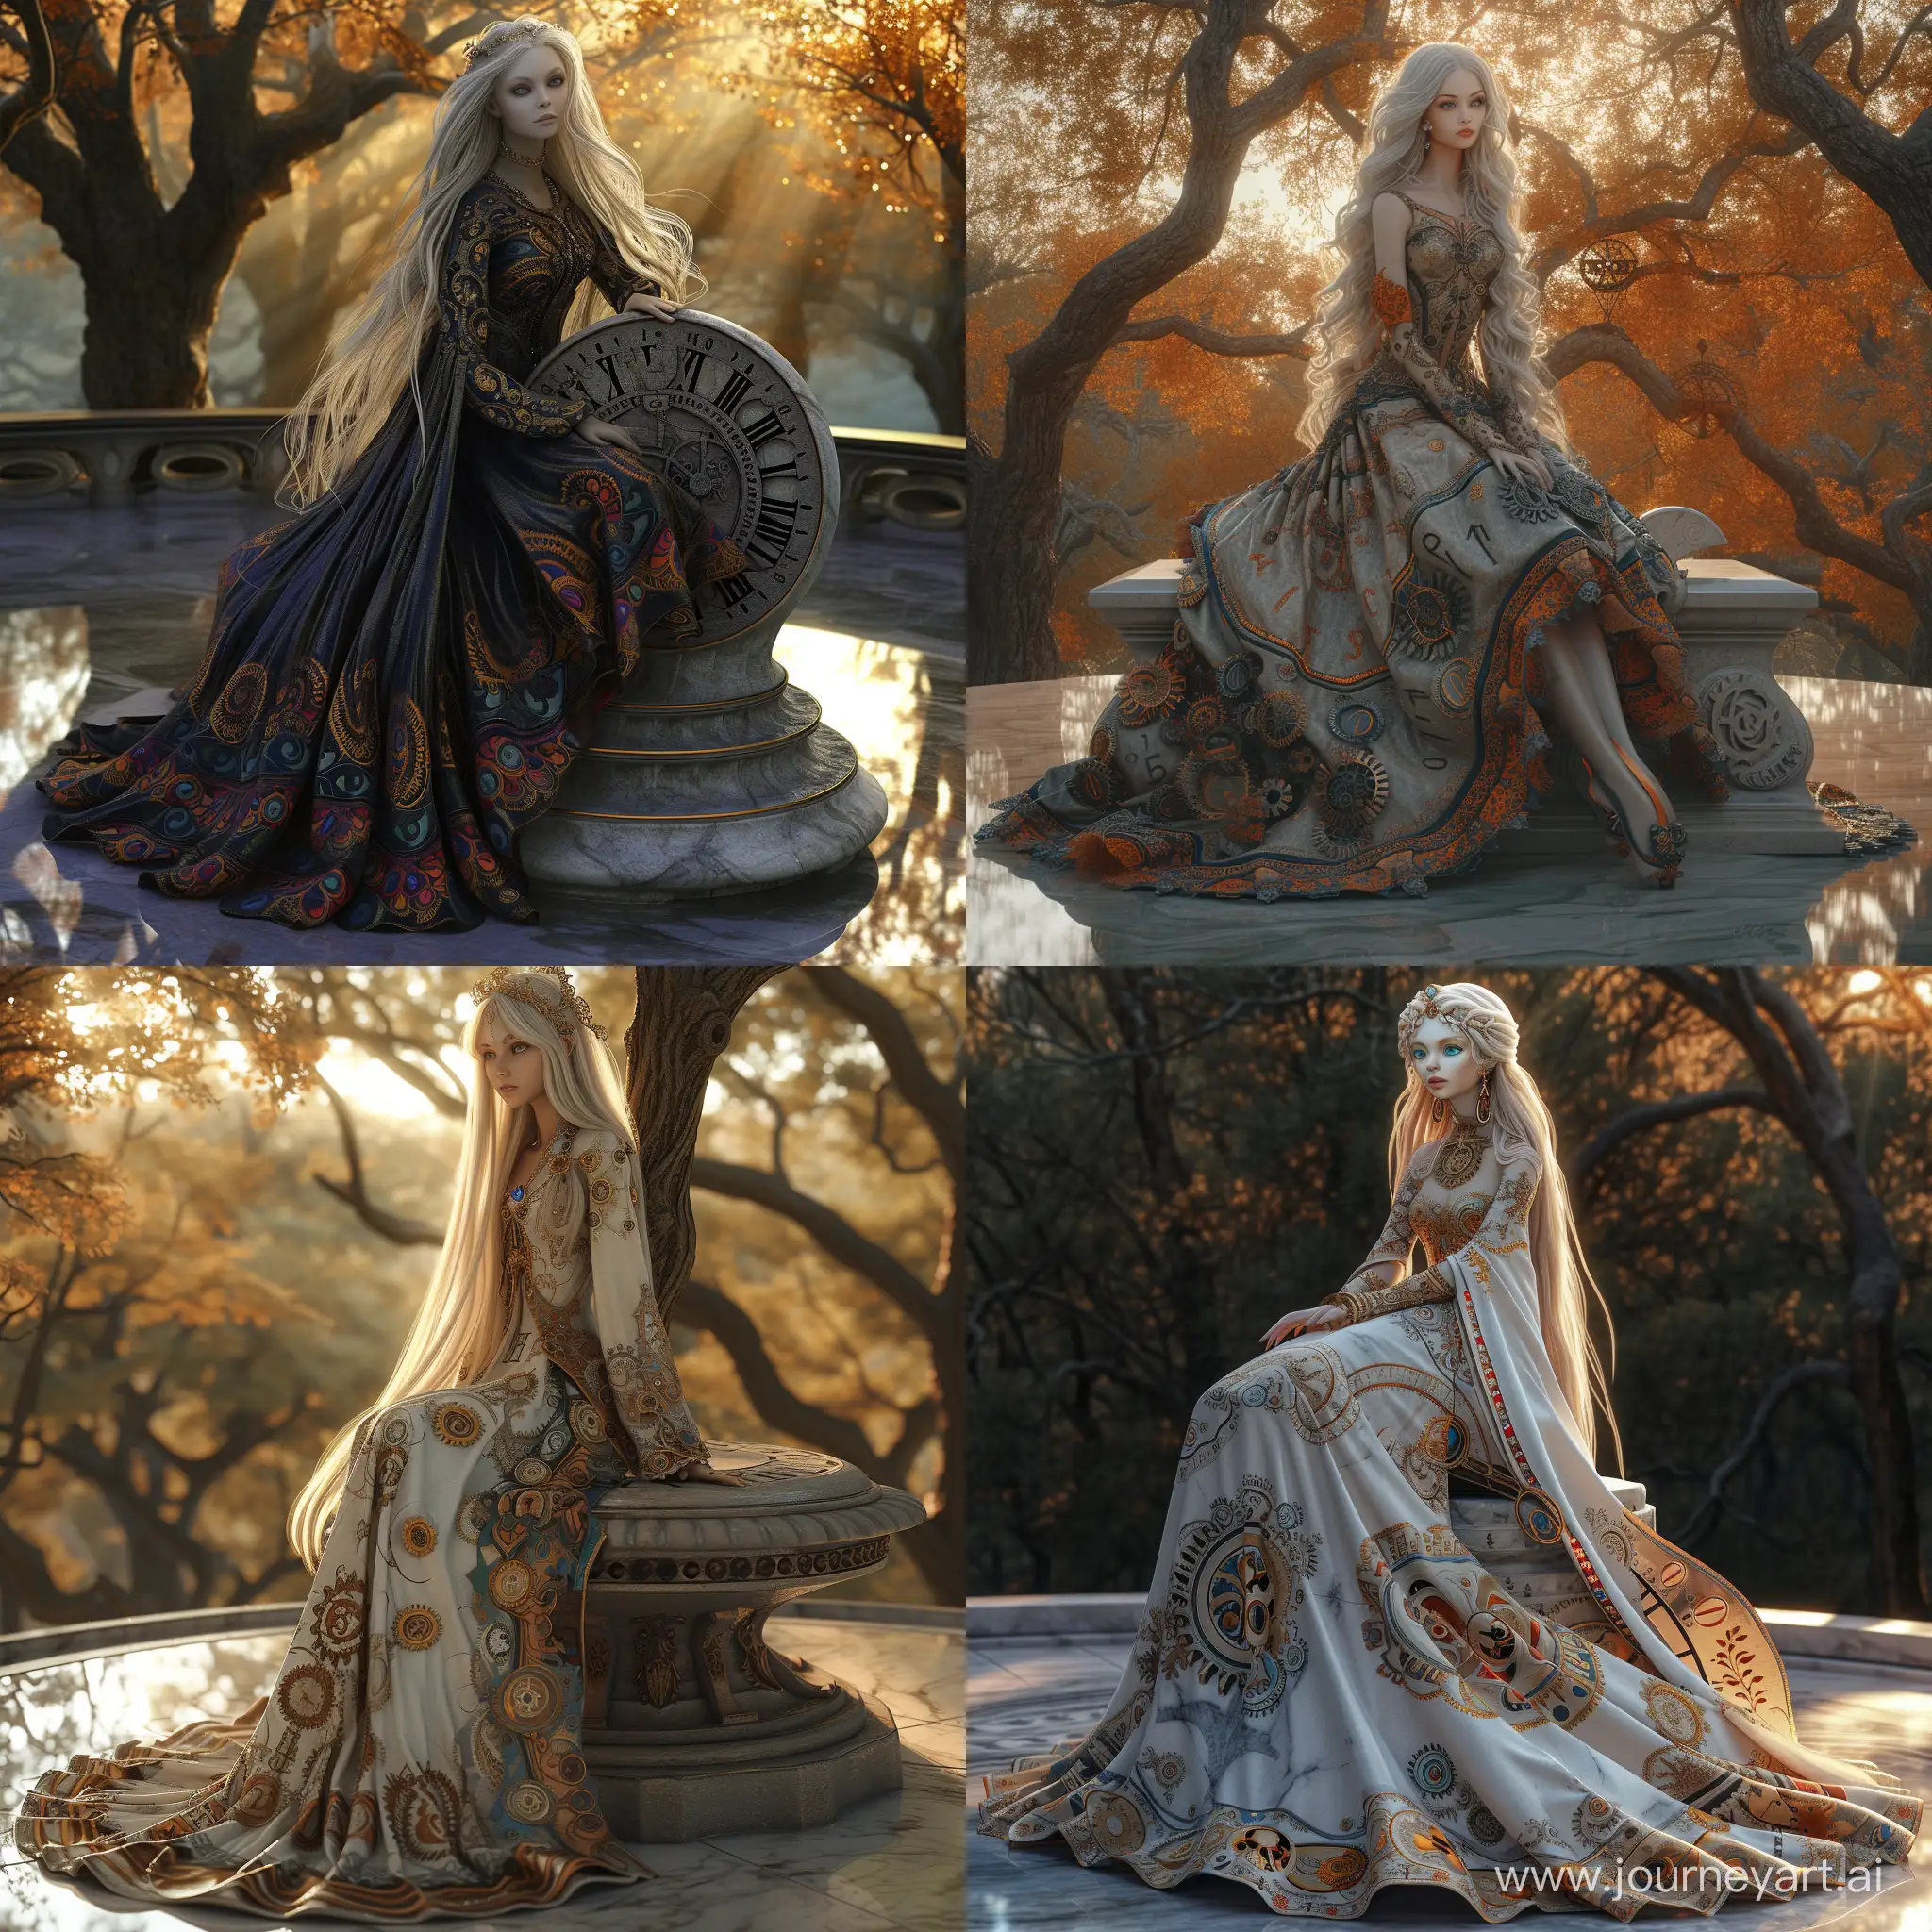 Time, Eternal Elegance skin, flowing gown with chromatic clockwork patterns, long ash-blond hair, wise (sapphire eyes:1.2), perched atop ageless stone sundial, serene (twilight ambiance:1.1), intricate gear adornments, reflective marble floor, crepuscular rays filtering through ancient oaks, ultra-high definition, ornate filigree, photorealistic, detalid,8k